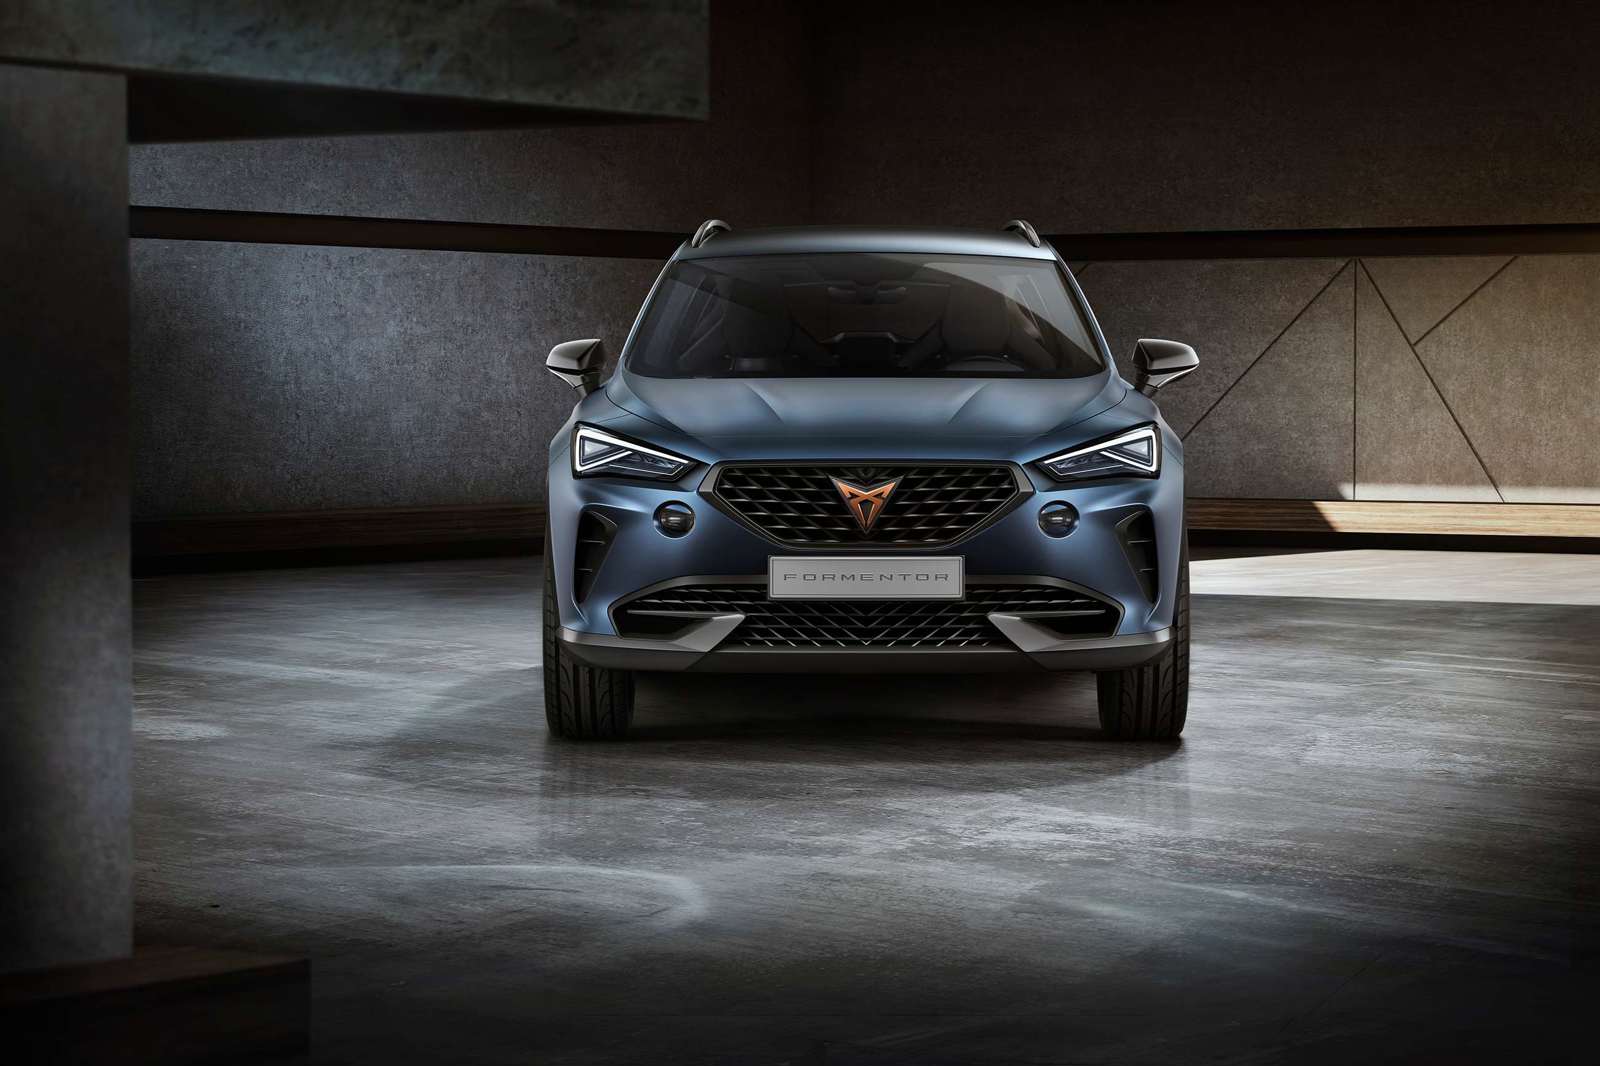 Cupra's first standalone model is the Formentor SUV